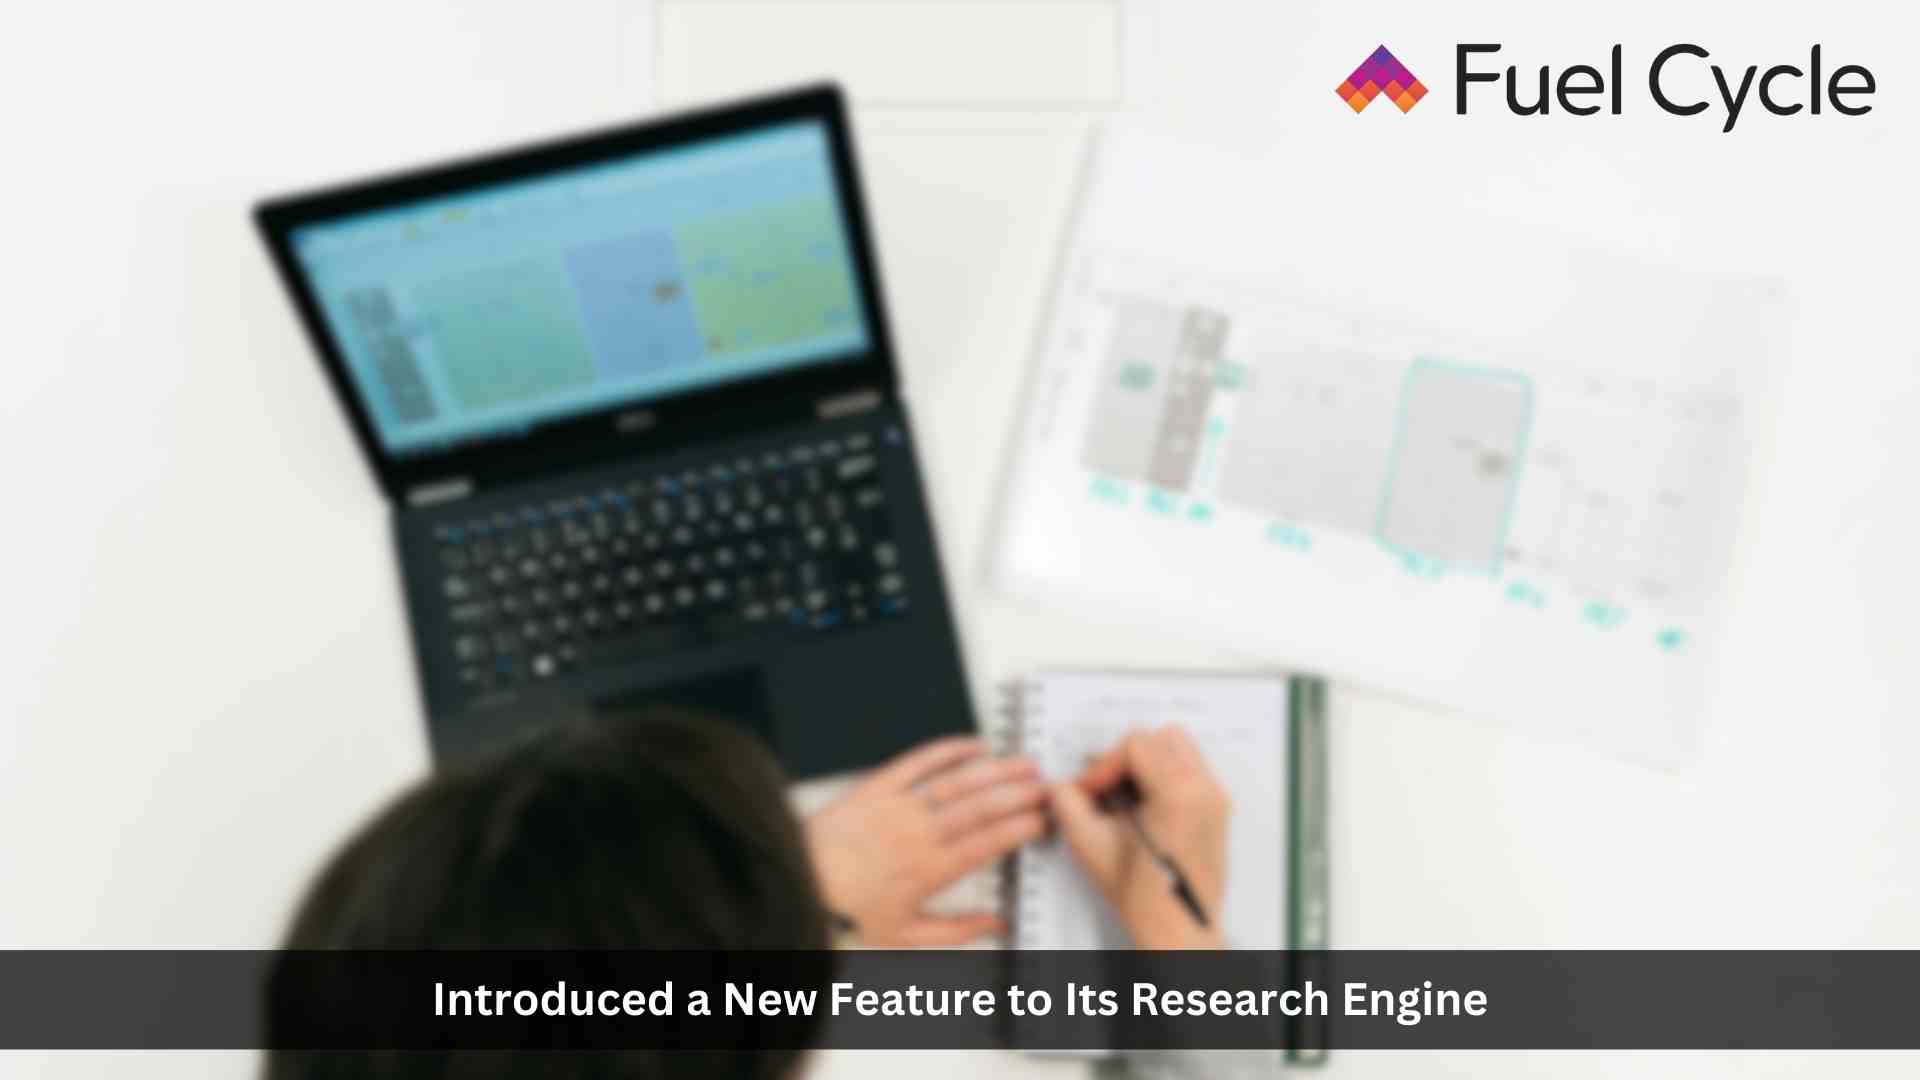 Fuel Cycle Brings the Social Experience to The Research Realm